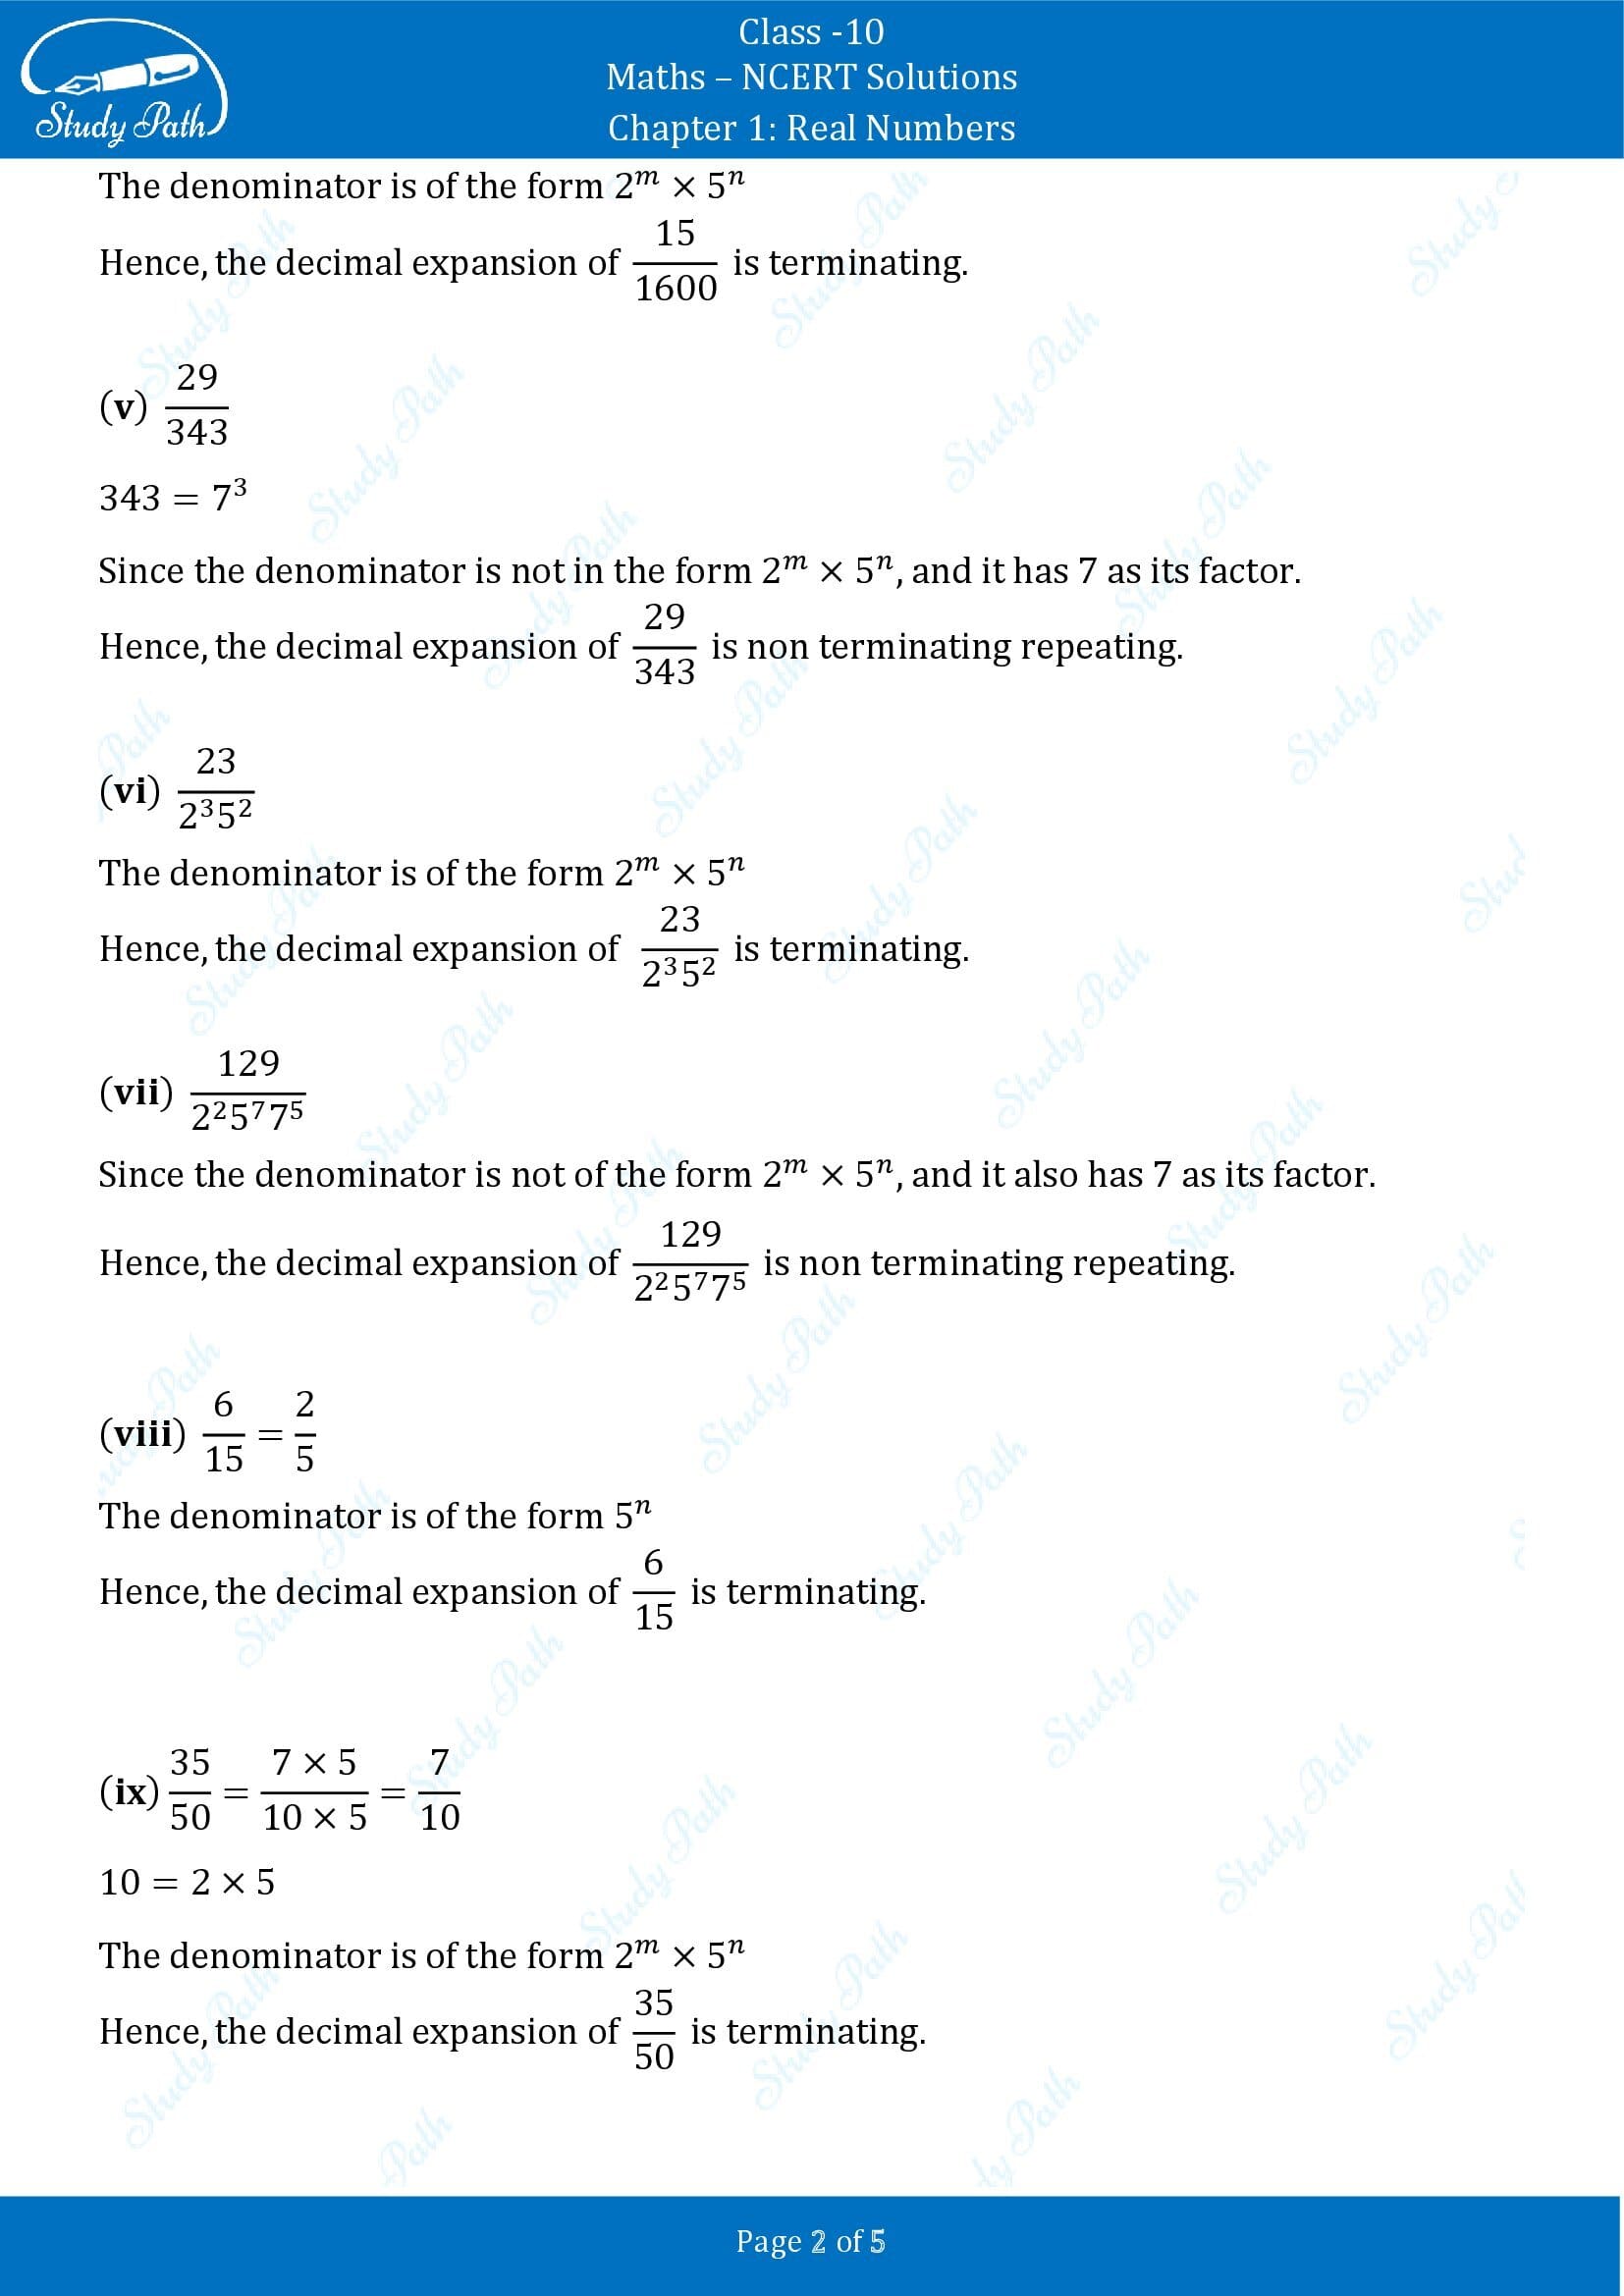 NCERT Solutions for Class 10 Maths Chapter 1 Real Numbers Exercise 1.4 00002